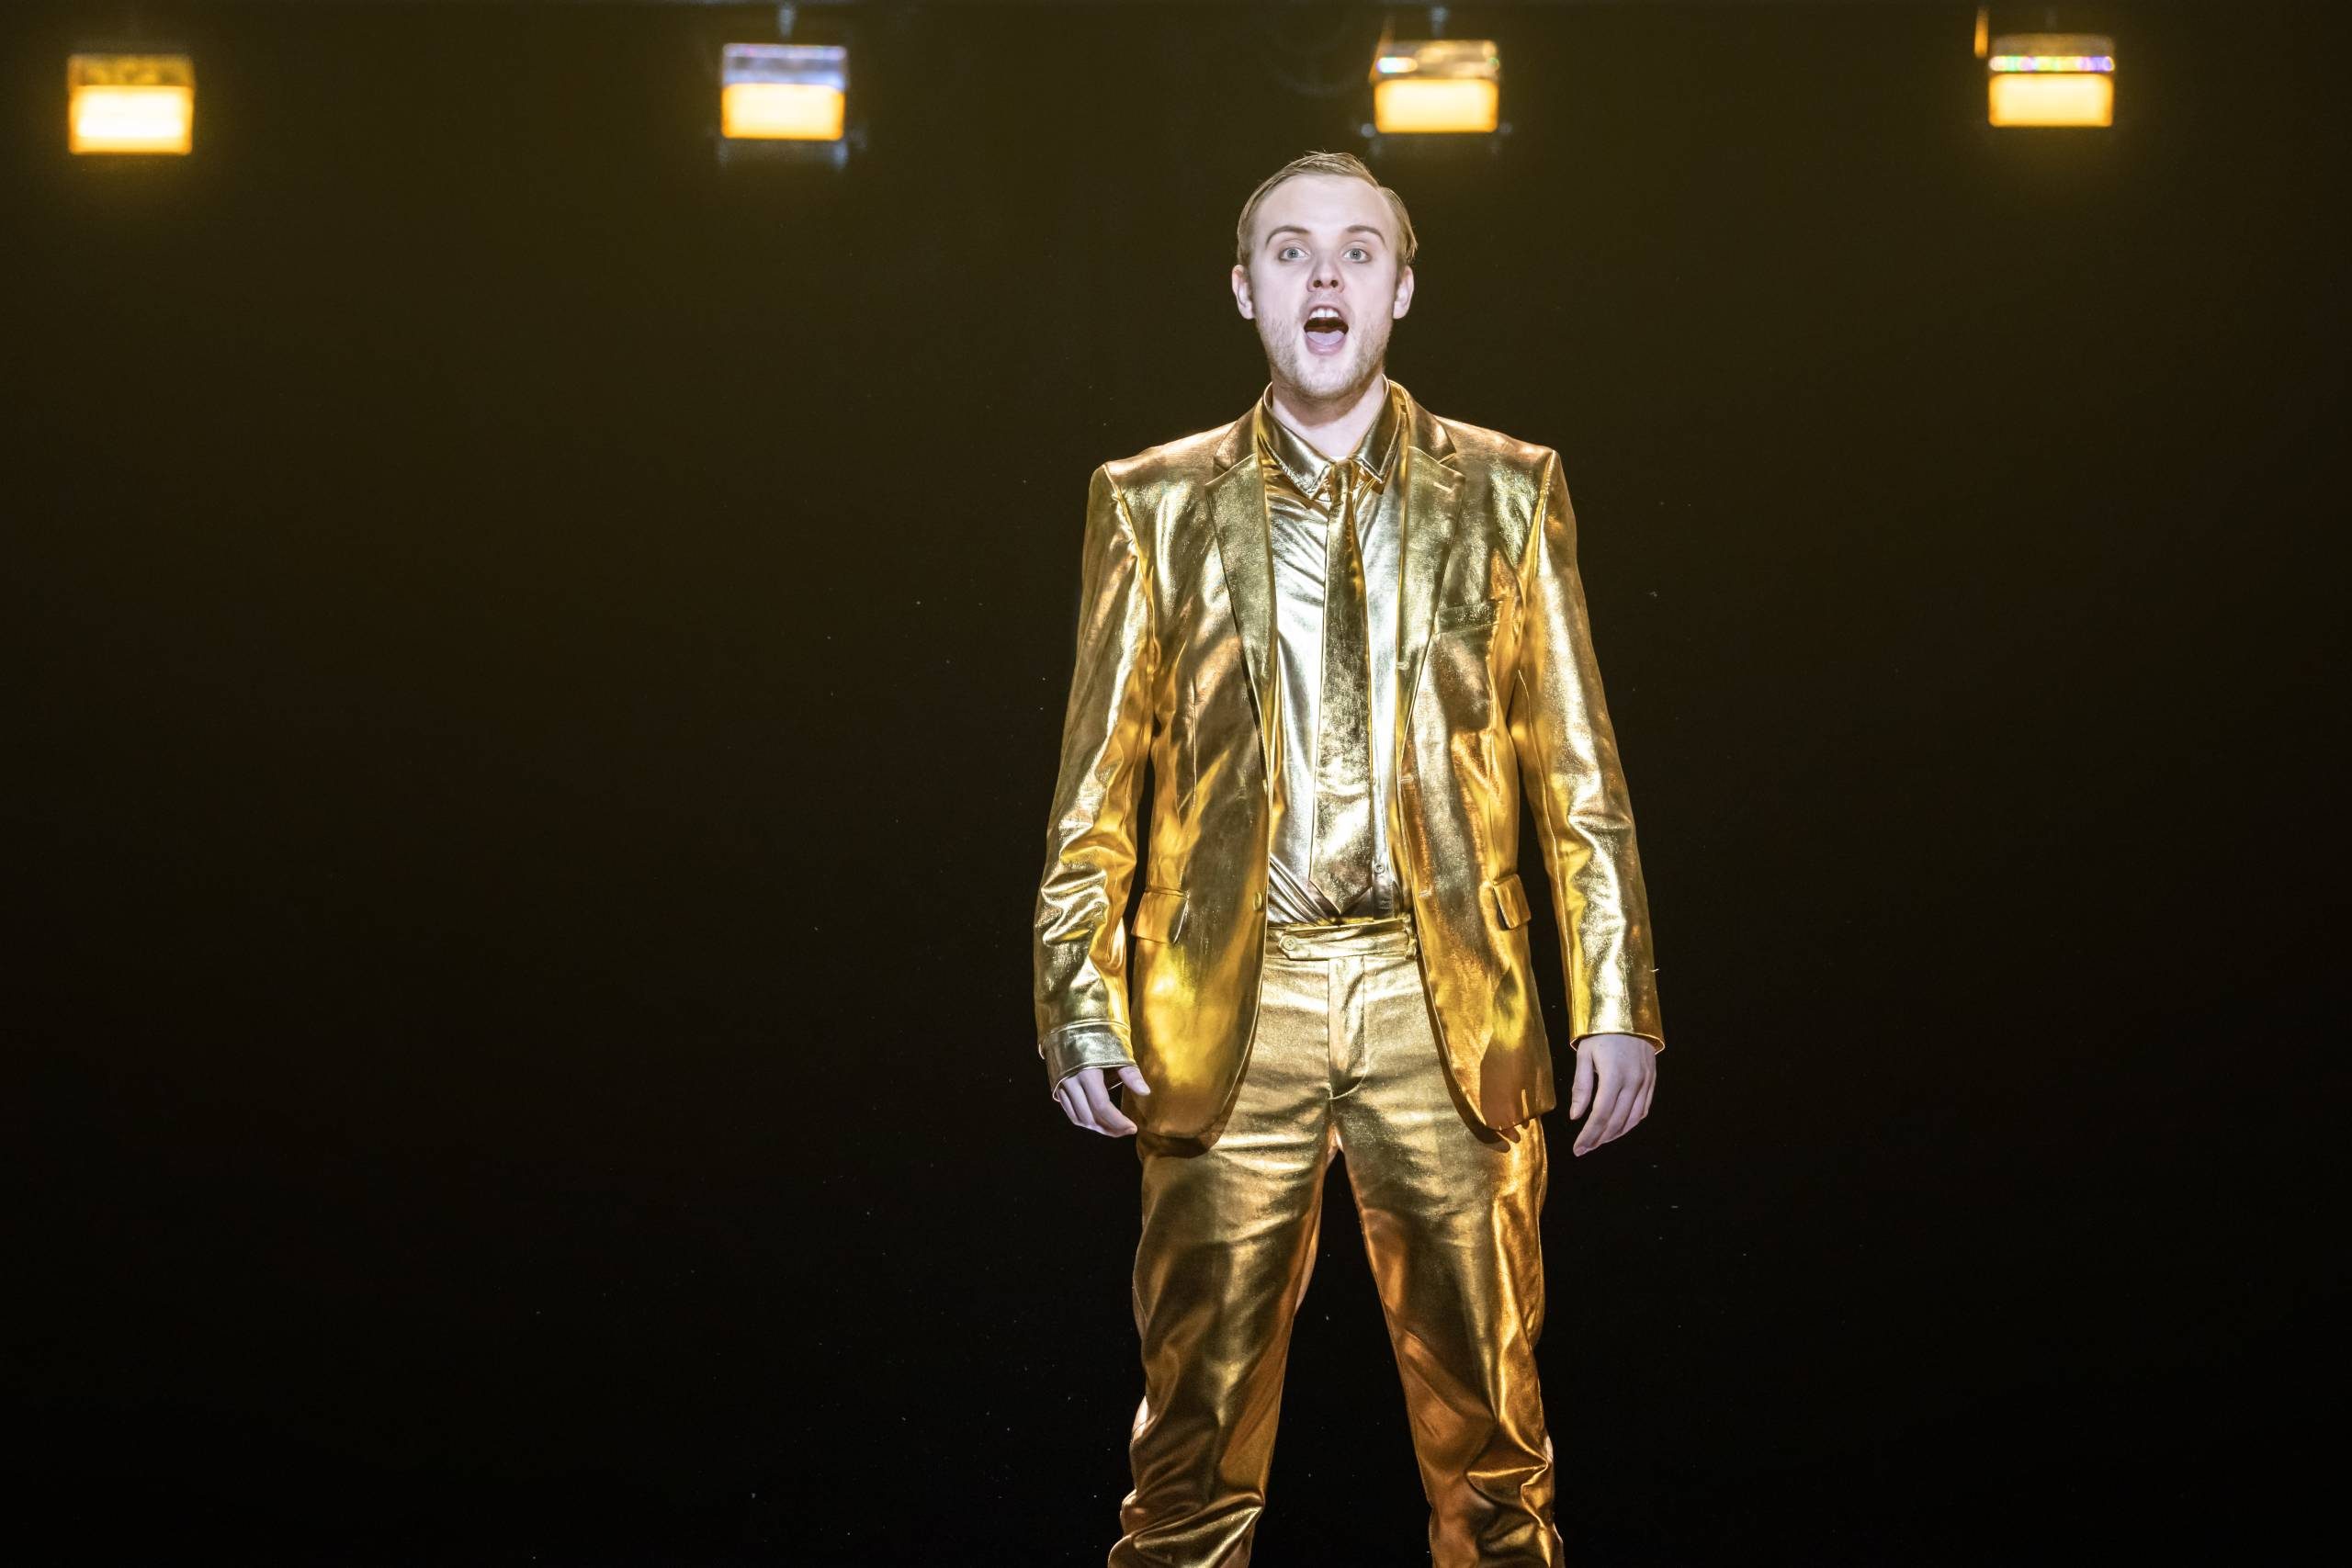 Alexander Chance singing in gold suit